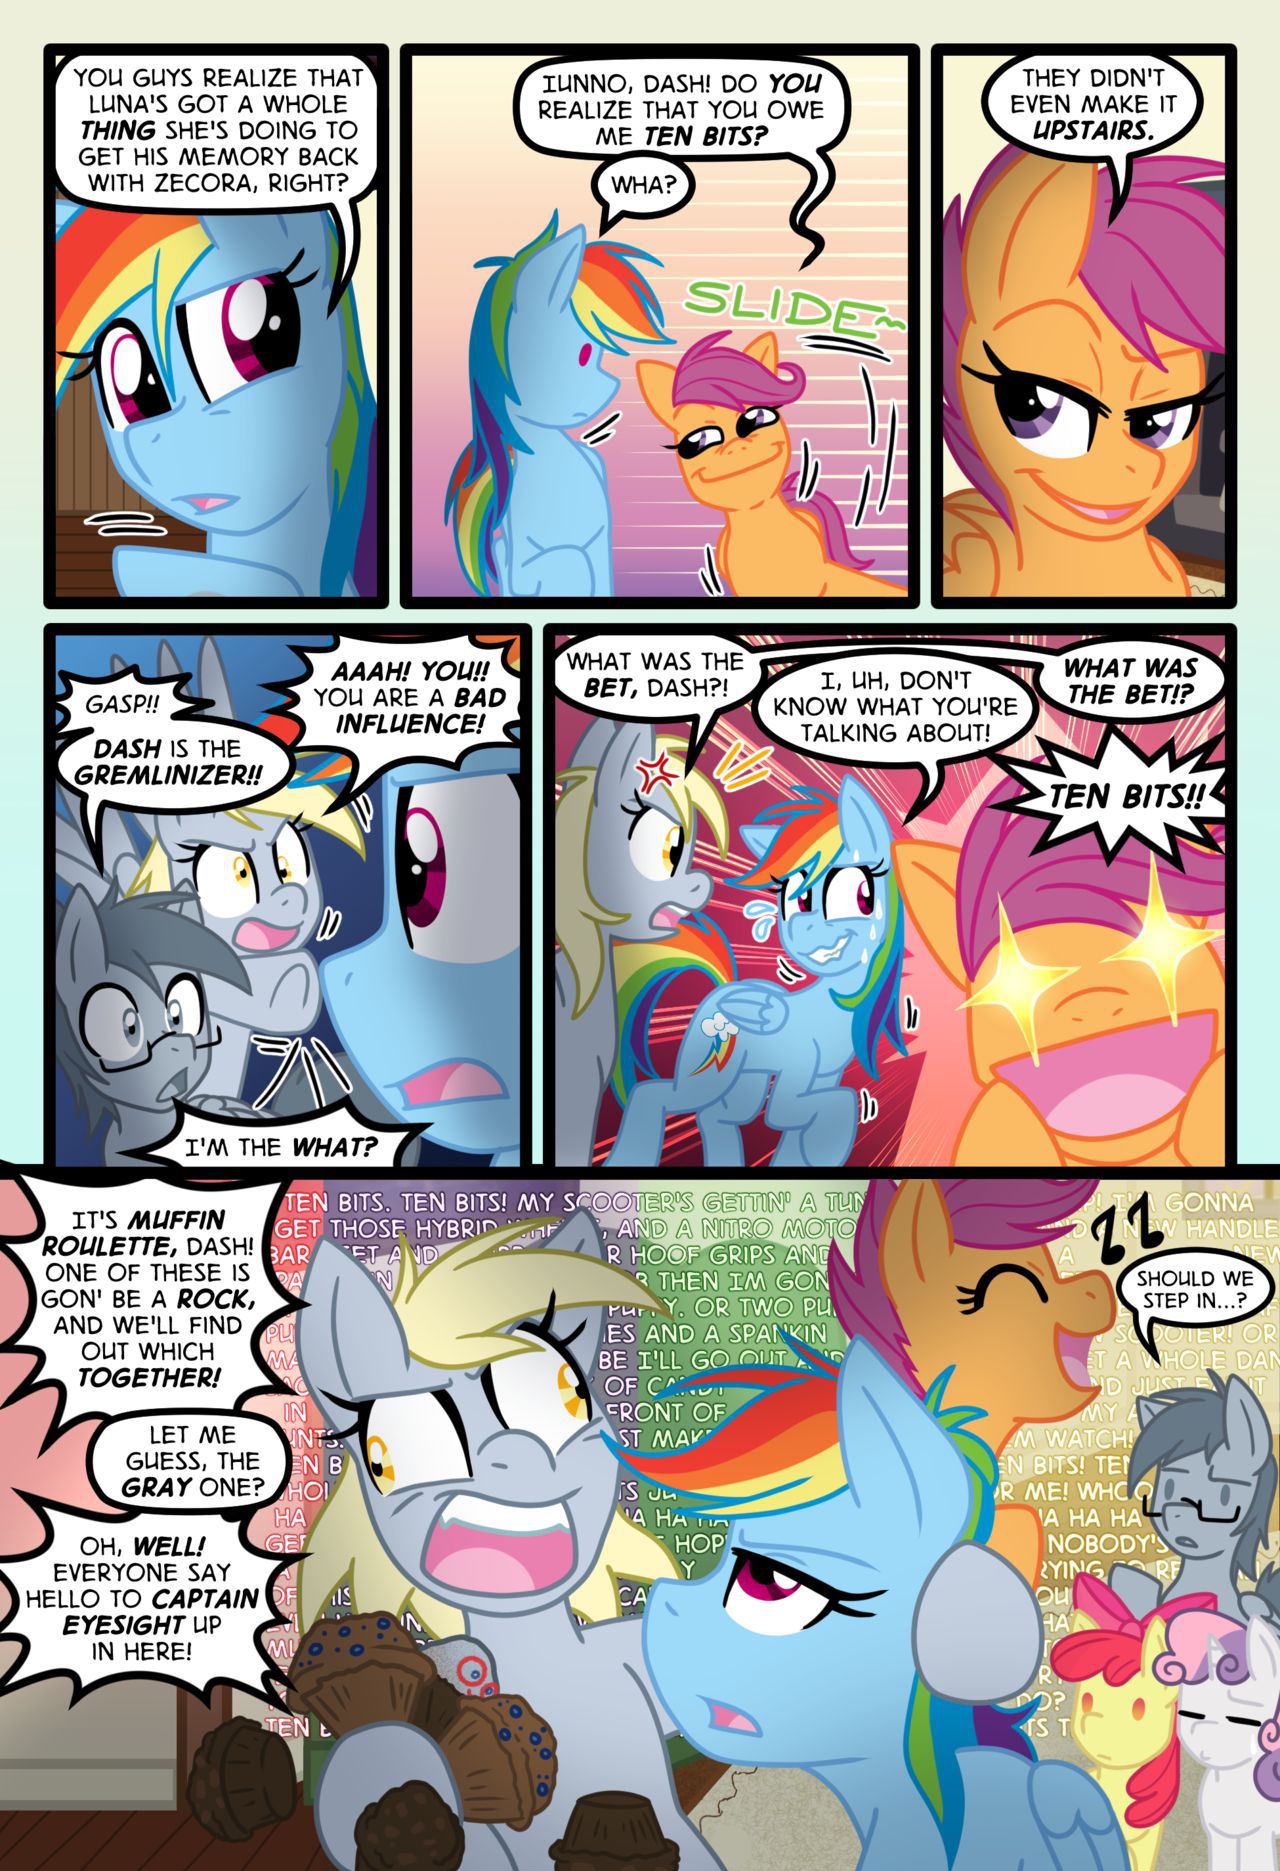 [Zaron] Lonely Hooves (My Little Pony Friendship Is Magic) [Ongoing] 214